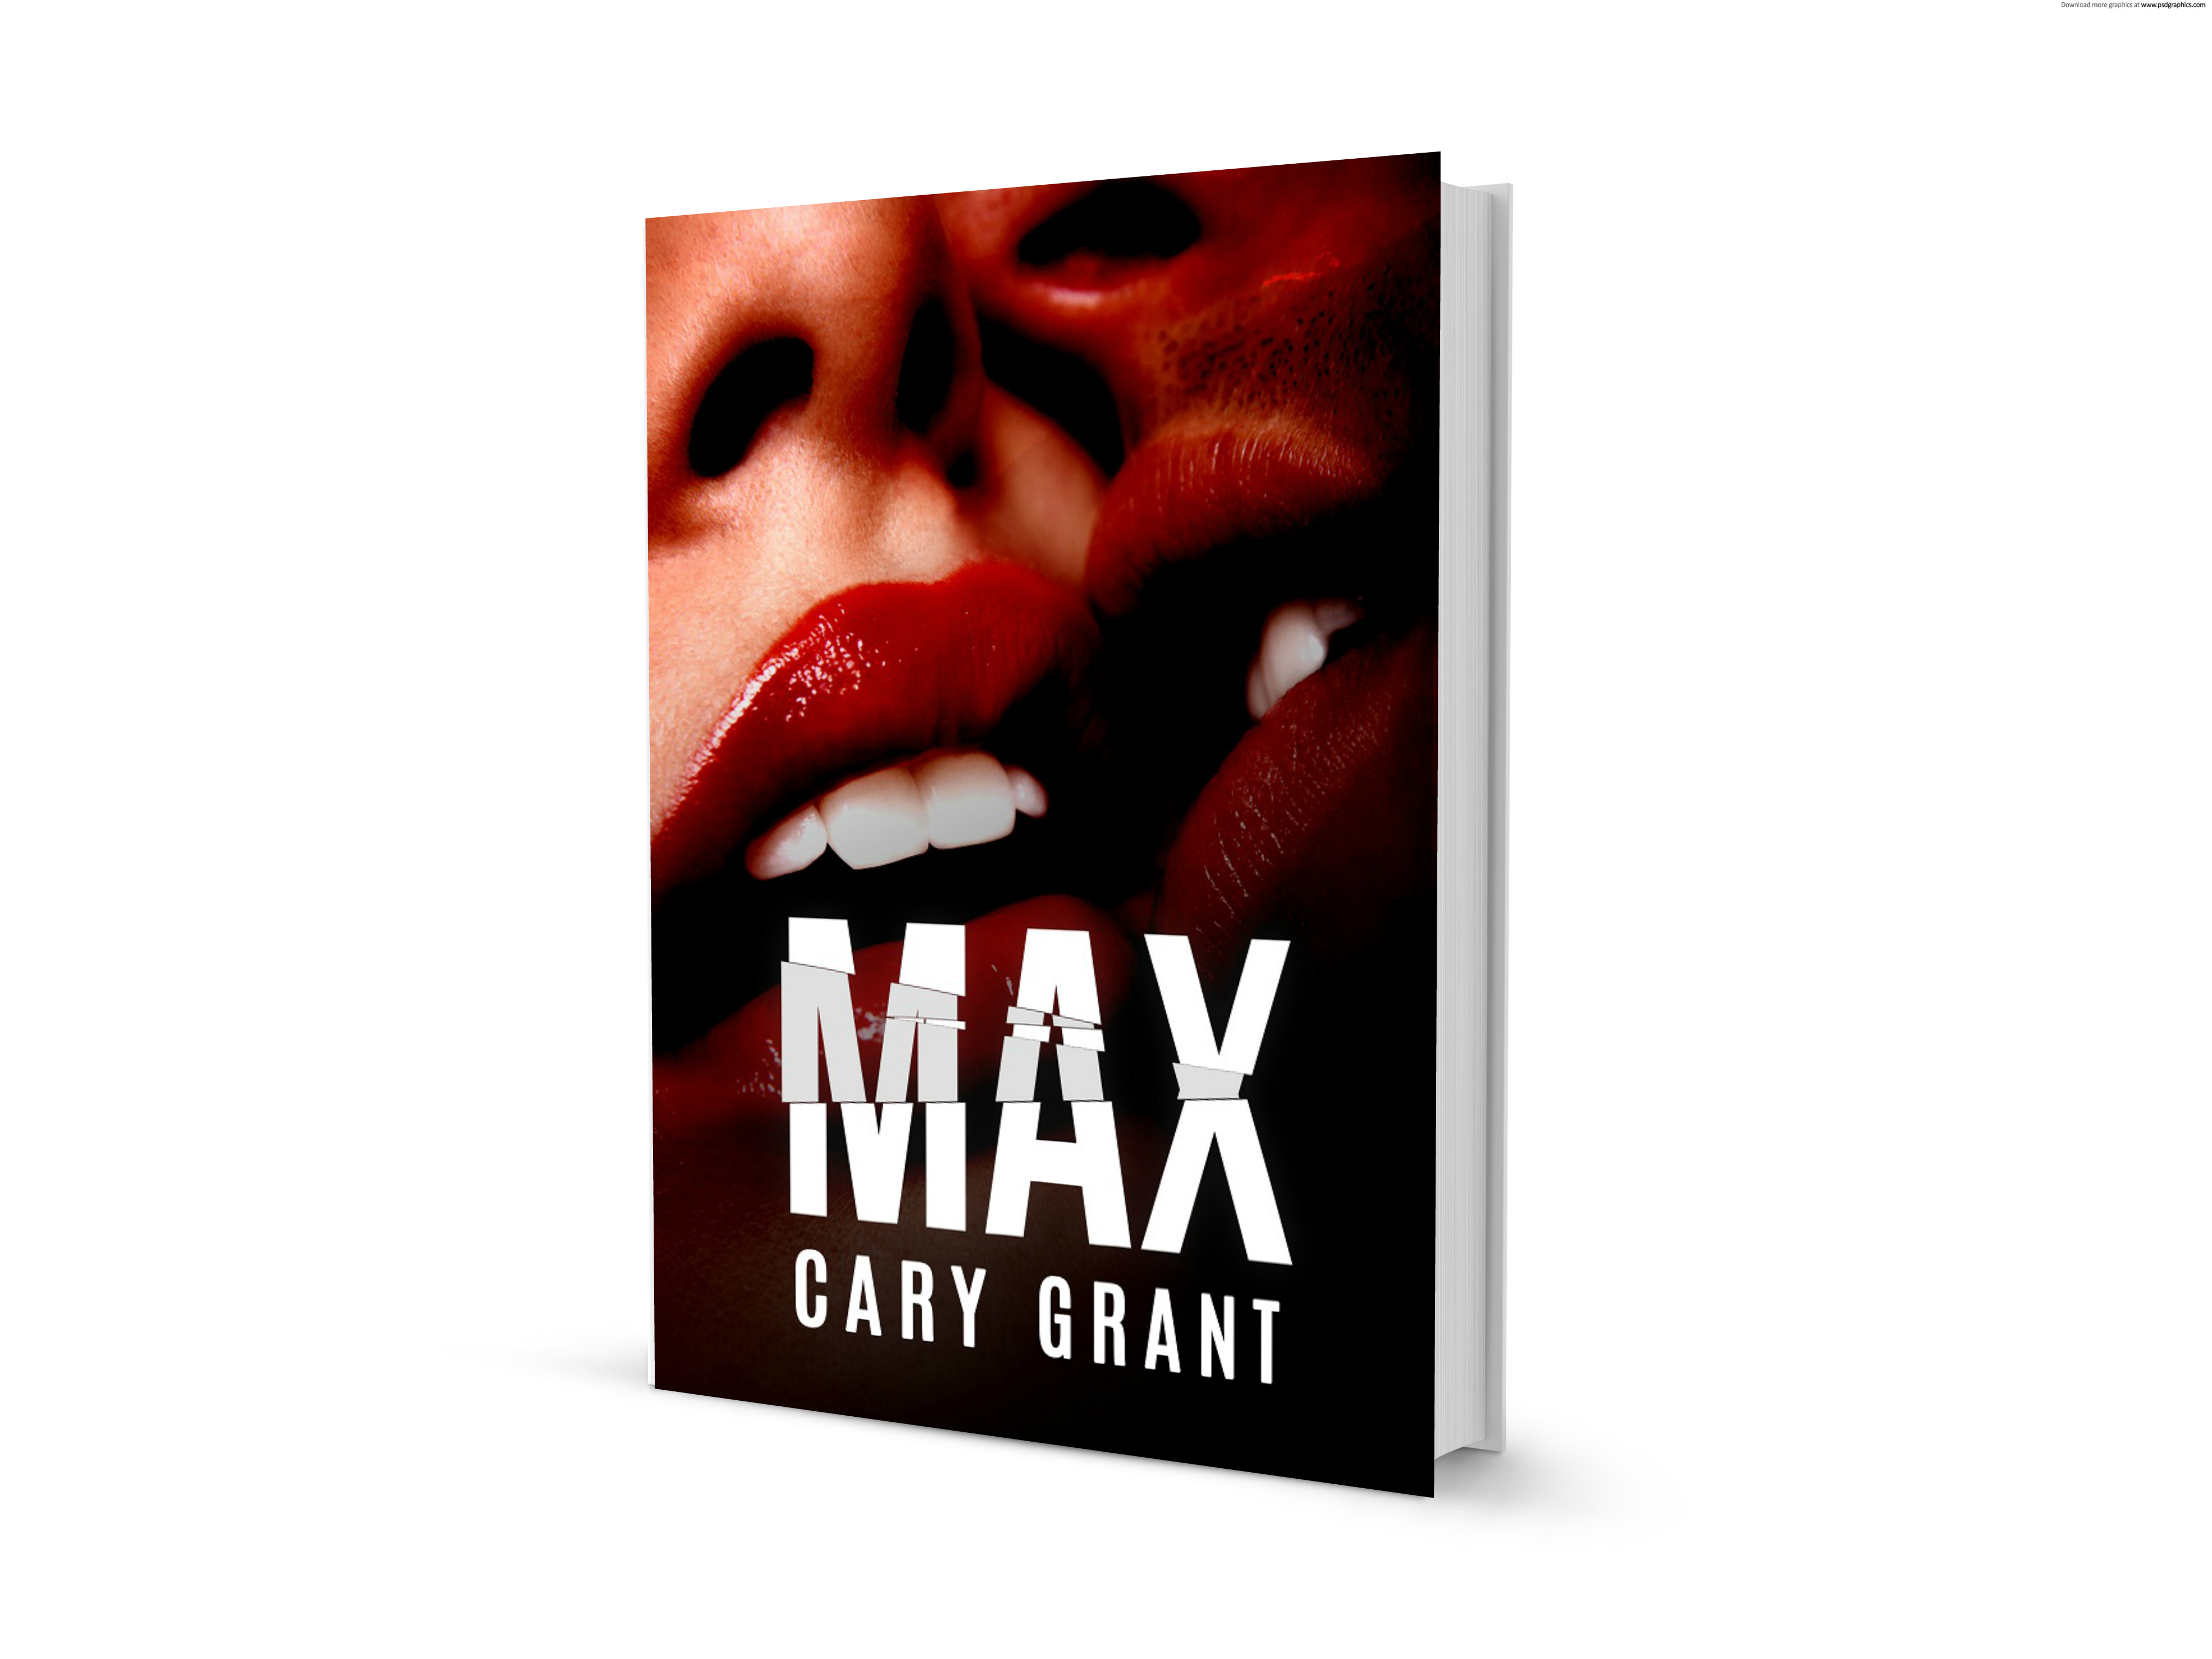 Max by Cary Grant